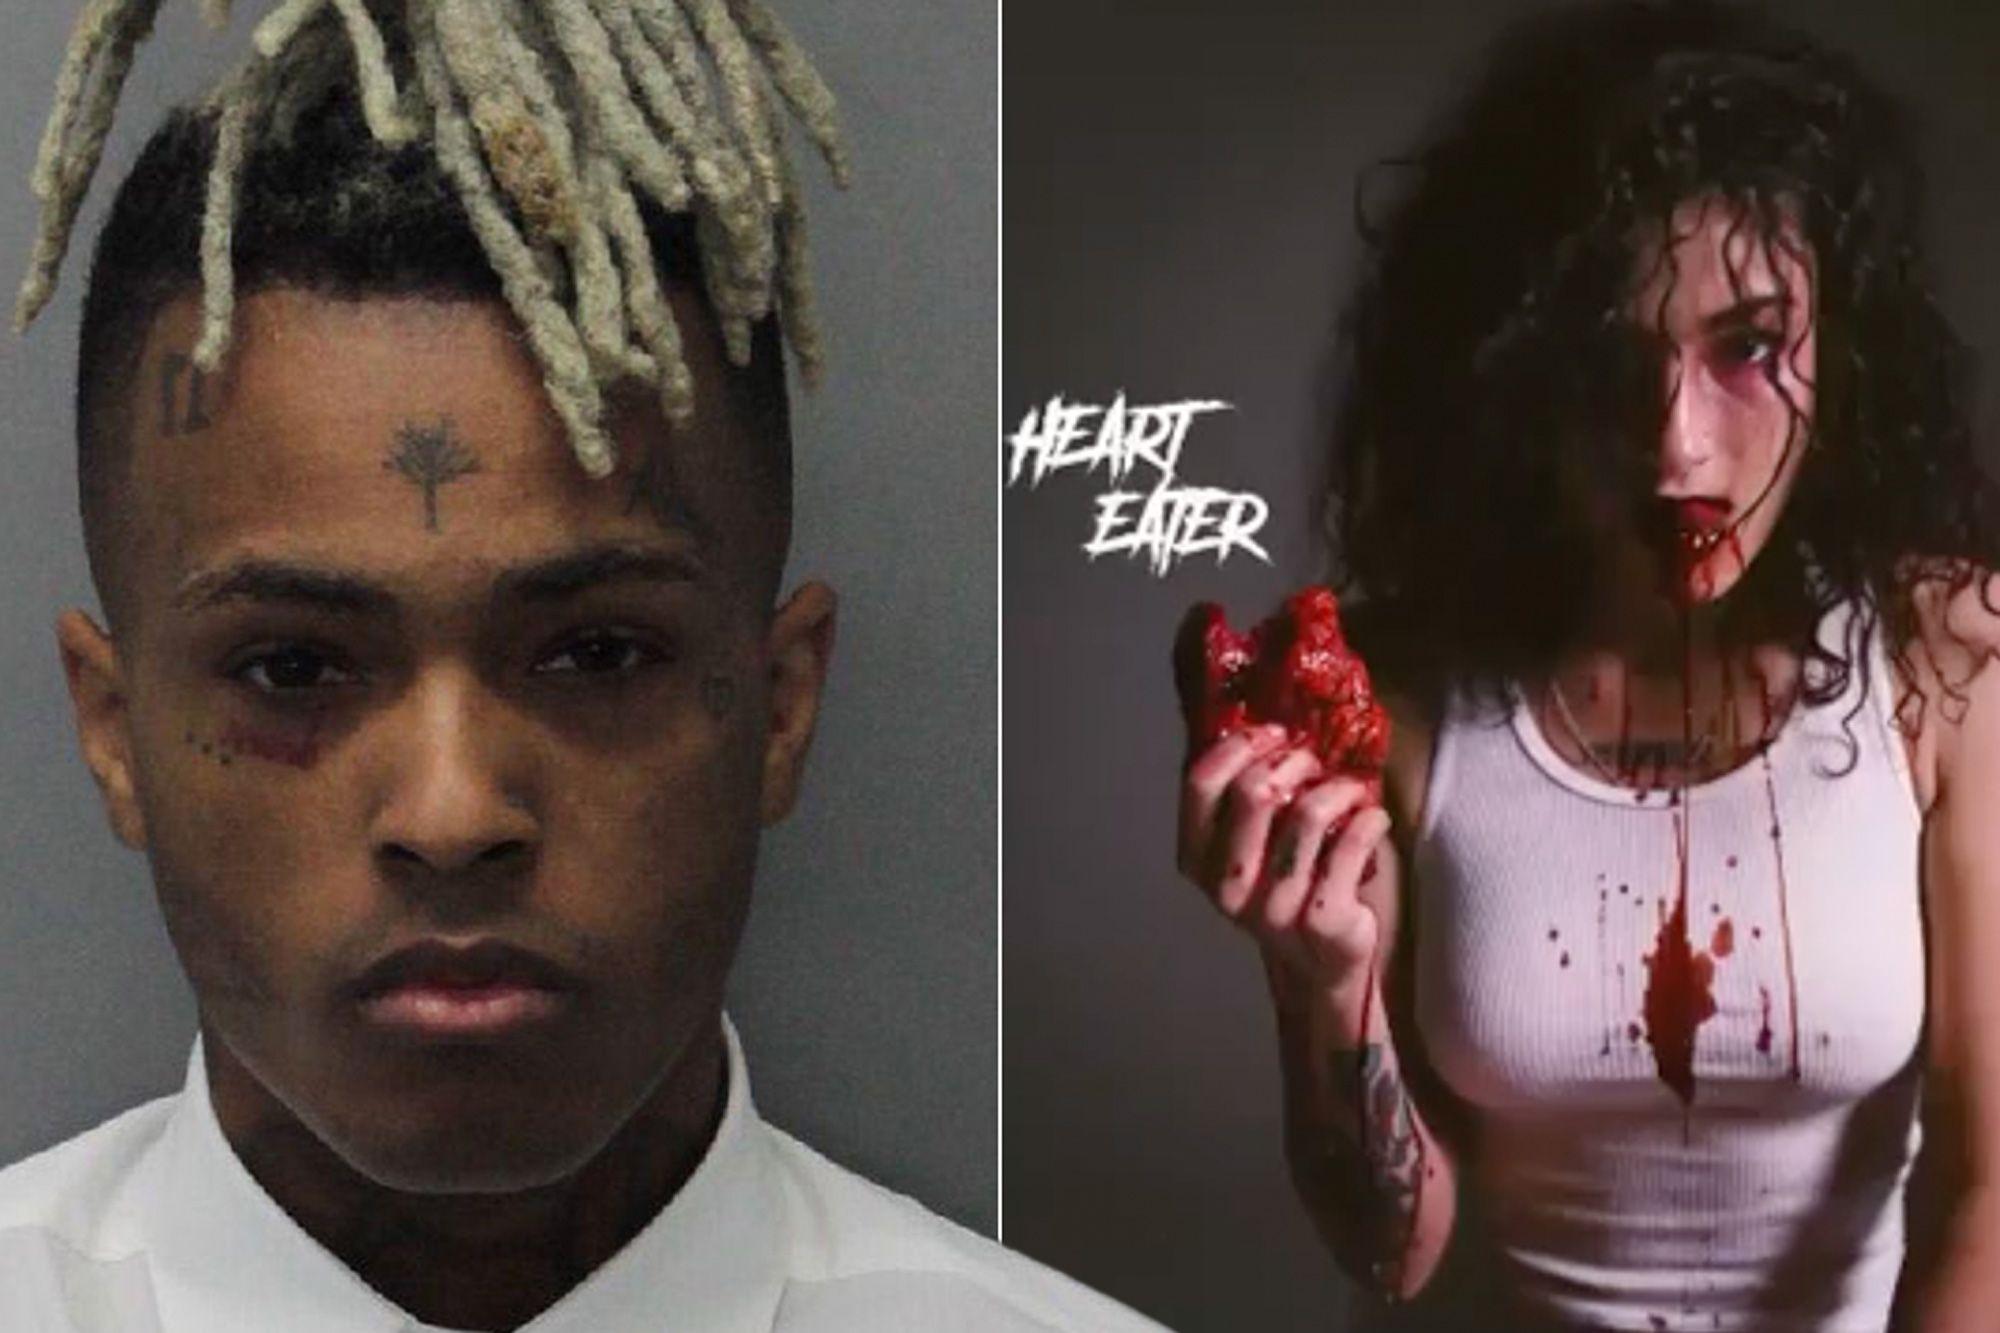 XXXTentacion's ex who alleged rapper abused her to appear